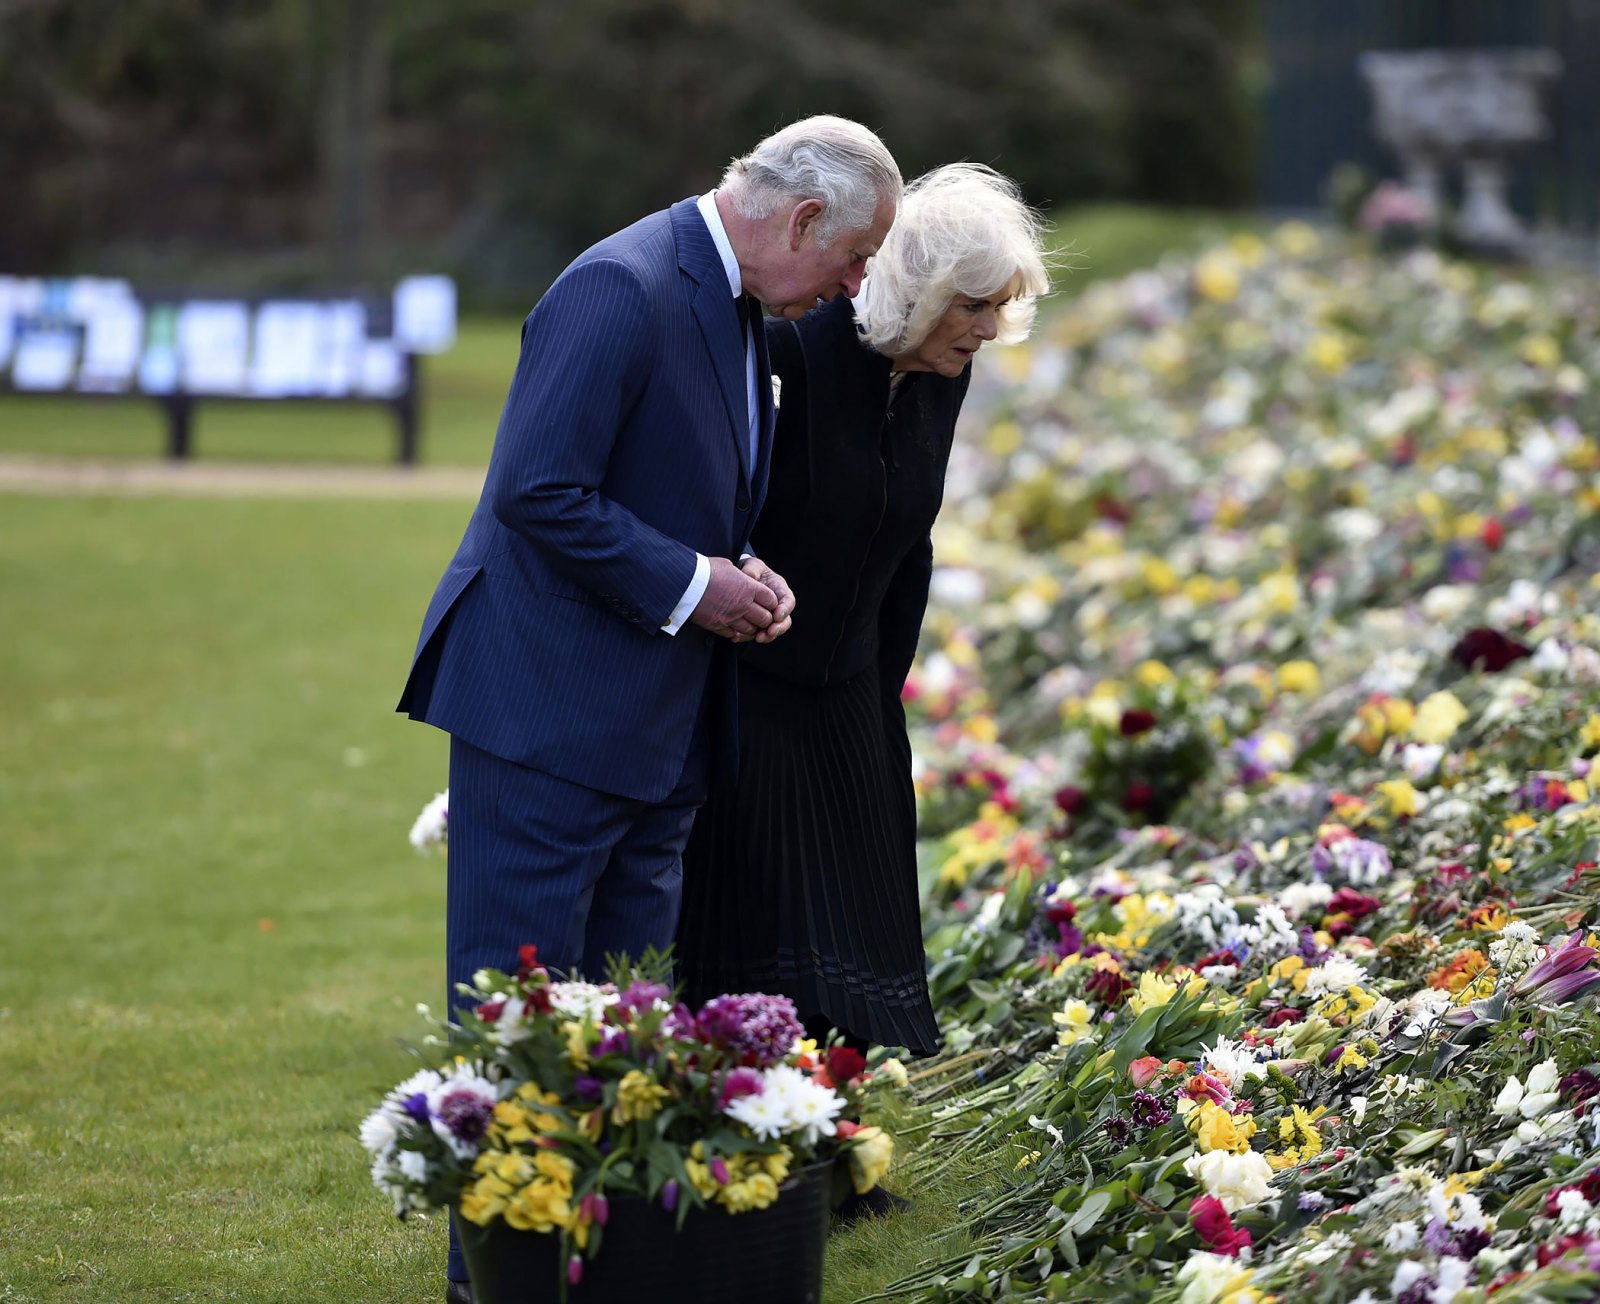 Prince Charles, Camila Pay Their Respects to Philip at Memorial Garden